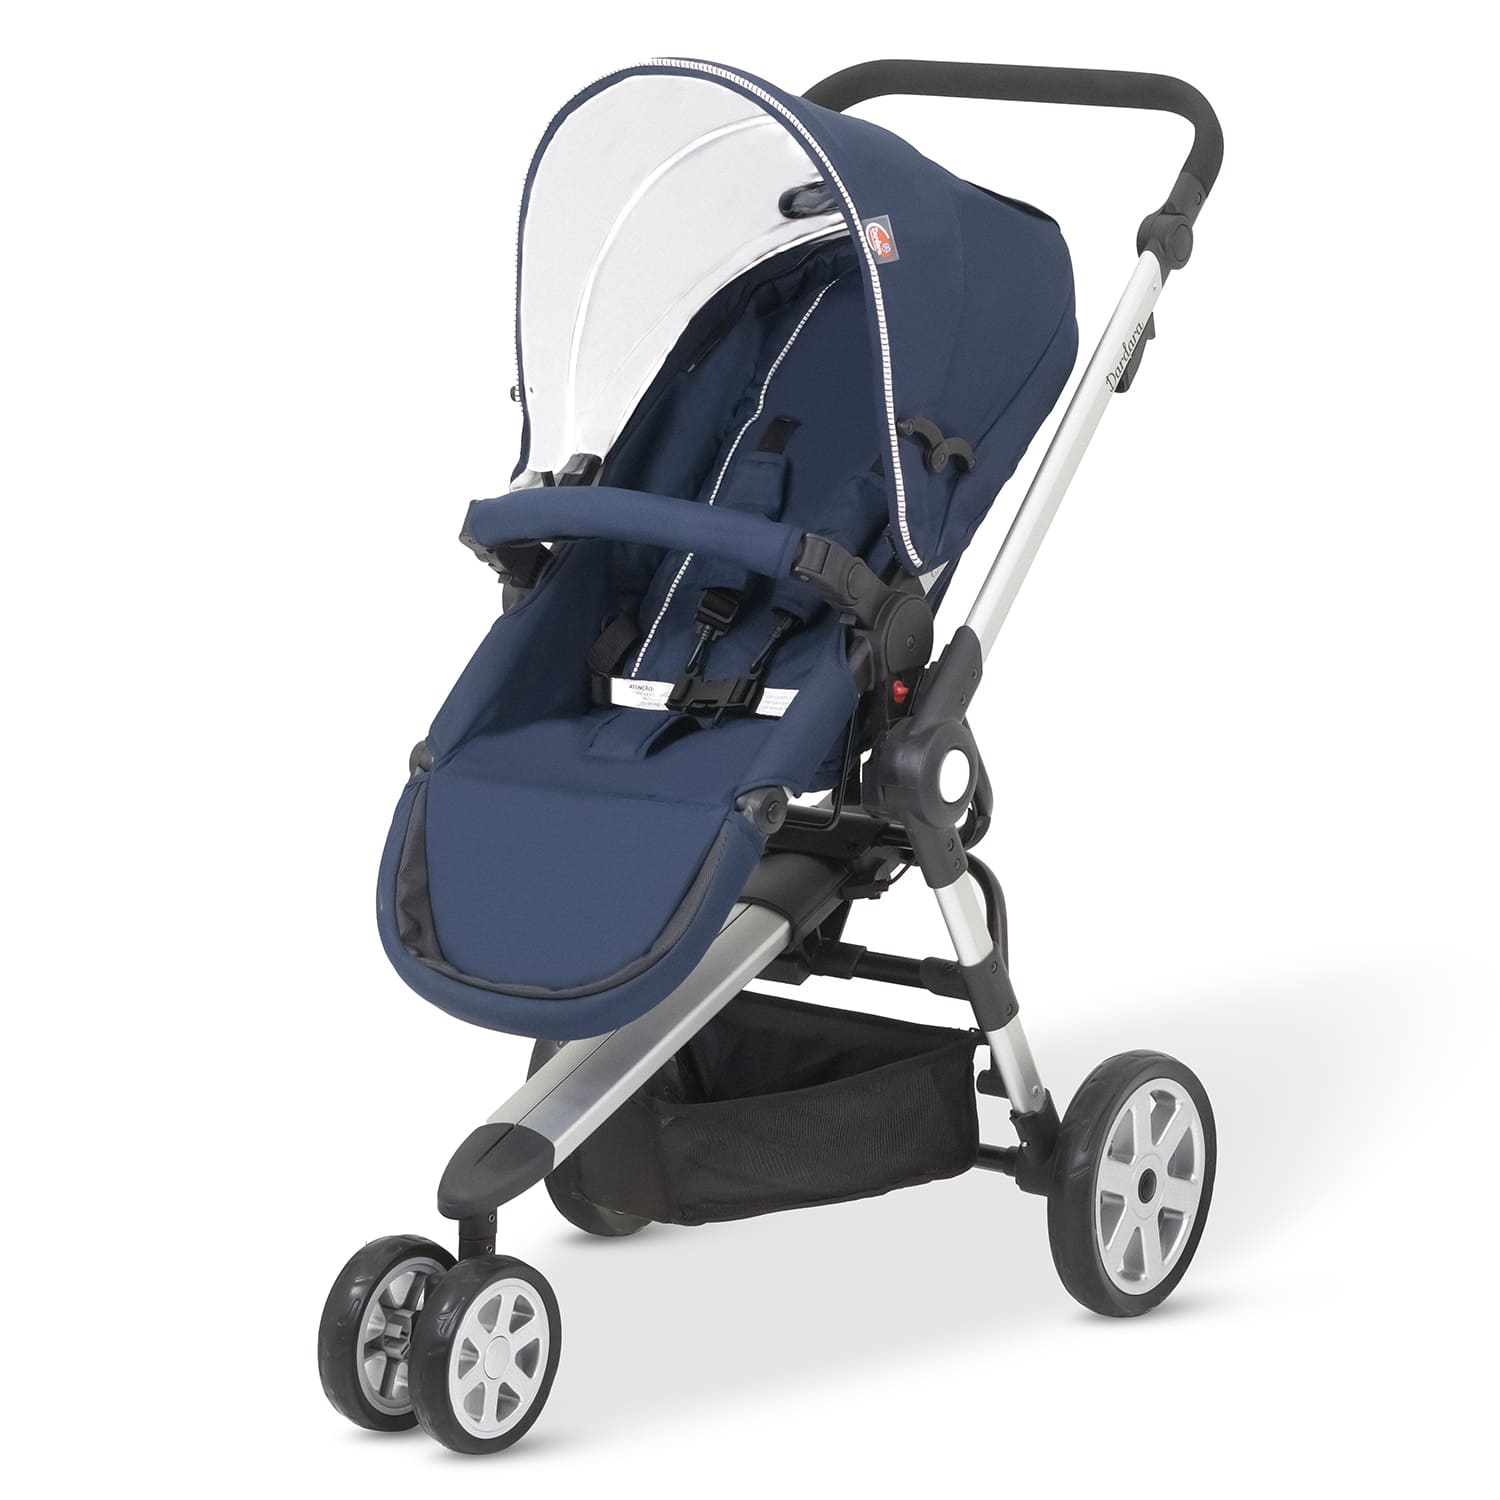 Innovative Baby Stroller for Kids - Comfort and Convenience Combined